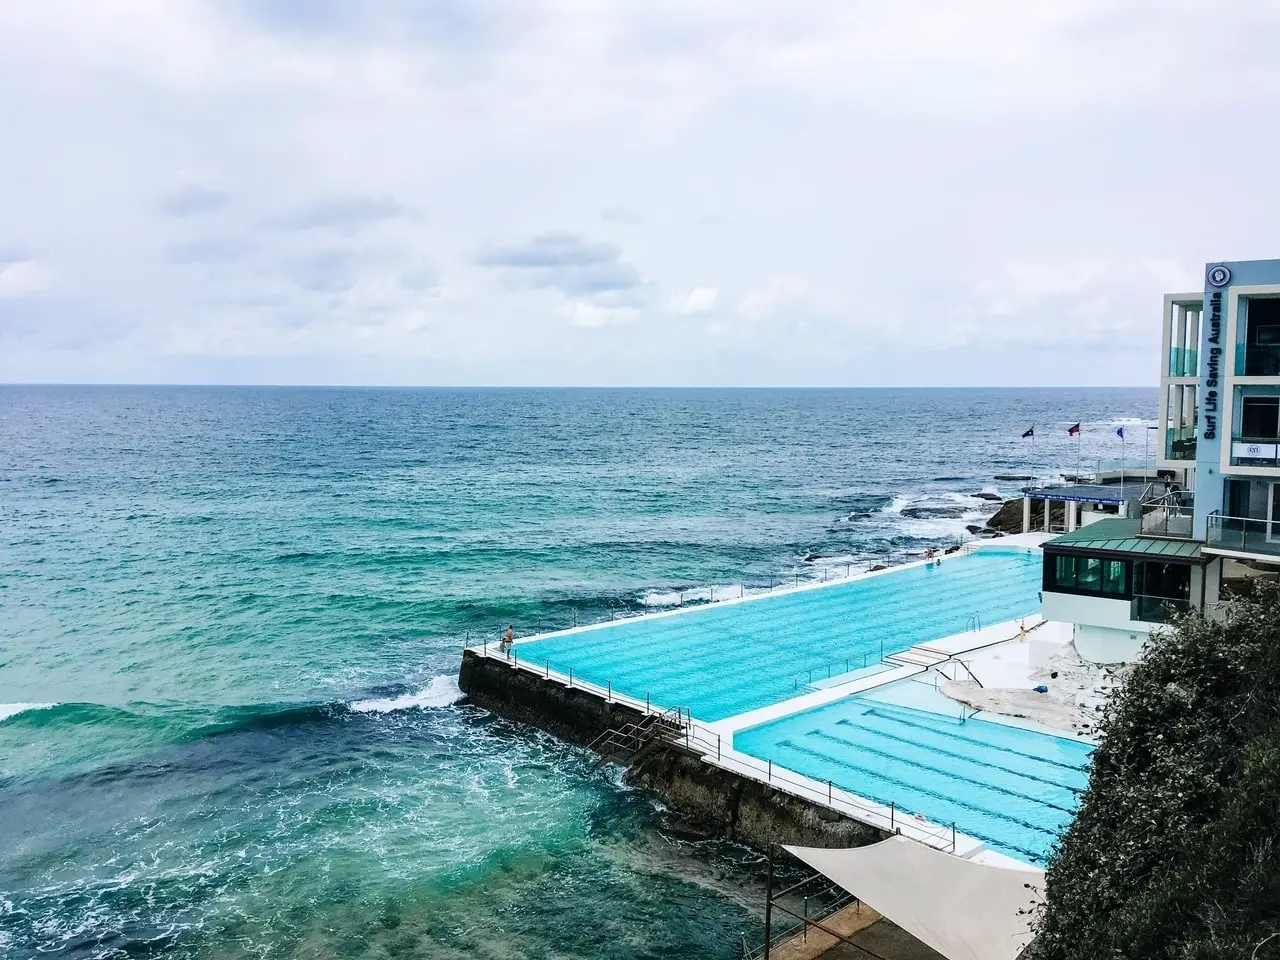 The Coldest Swim Of My Life At The Bondi Beach Pool Many More Maps